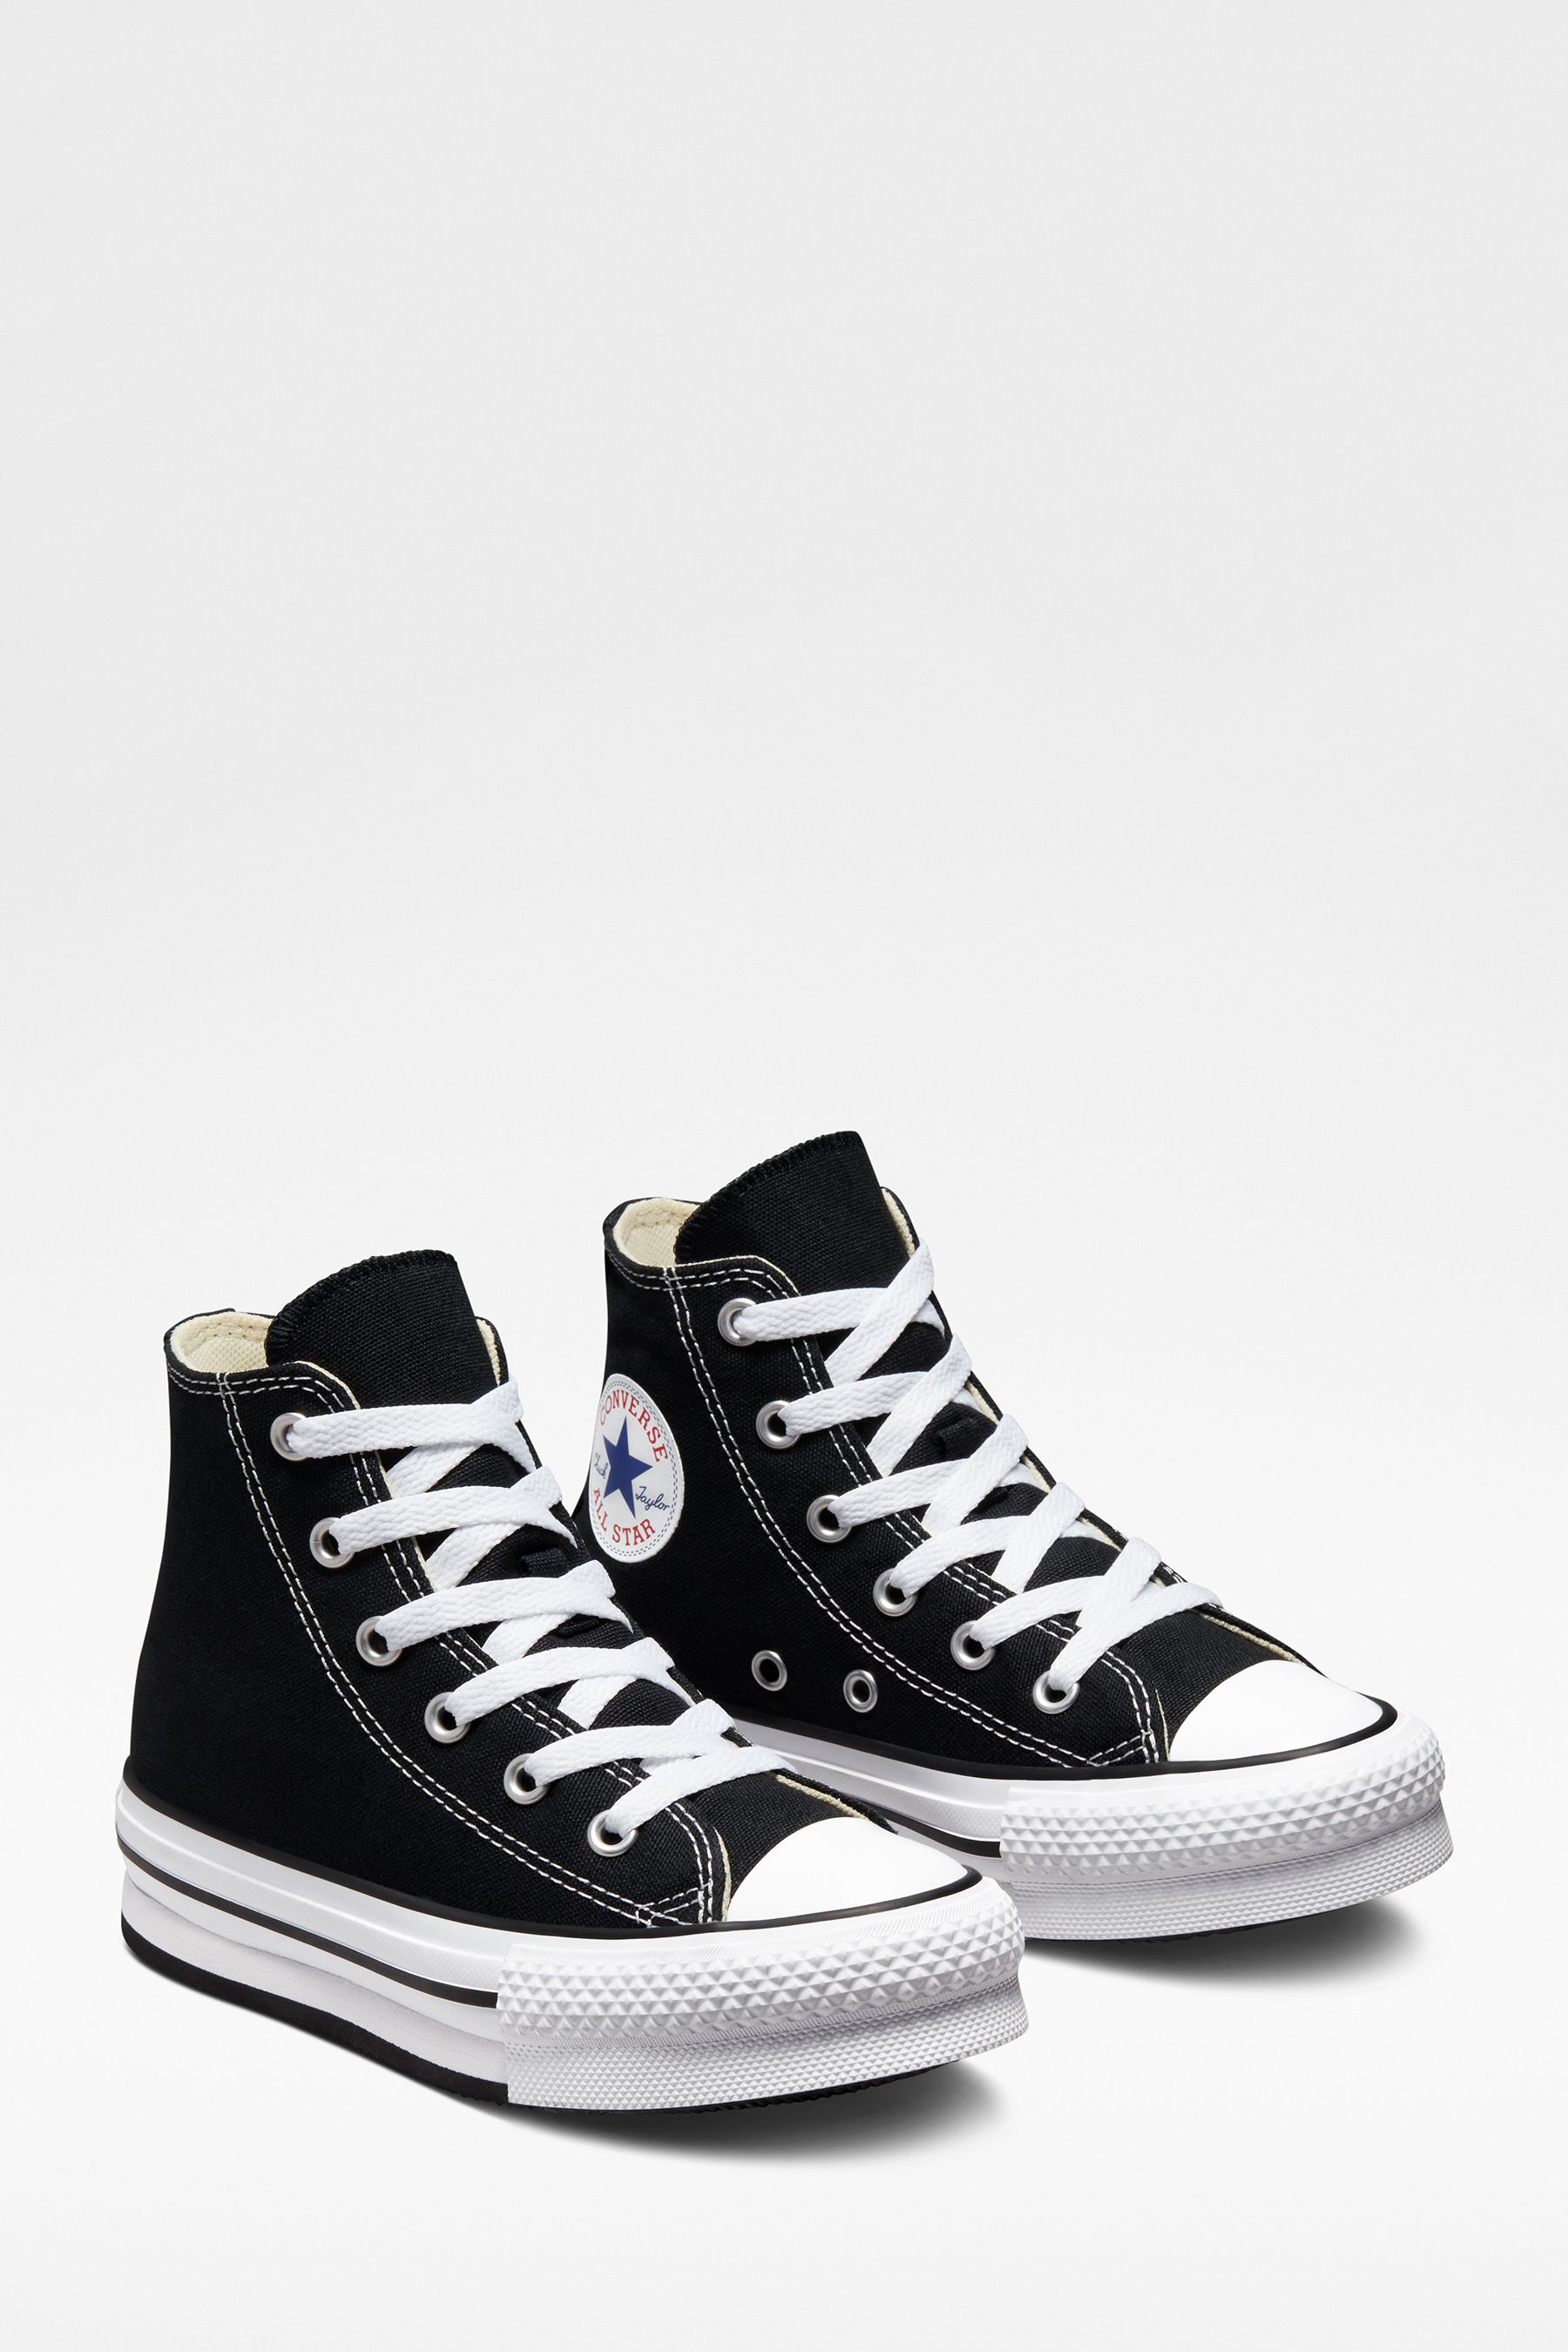 Buy Converse Black Eva Lift High Top Junior Trainers from the Next UK ...